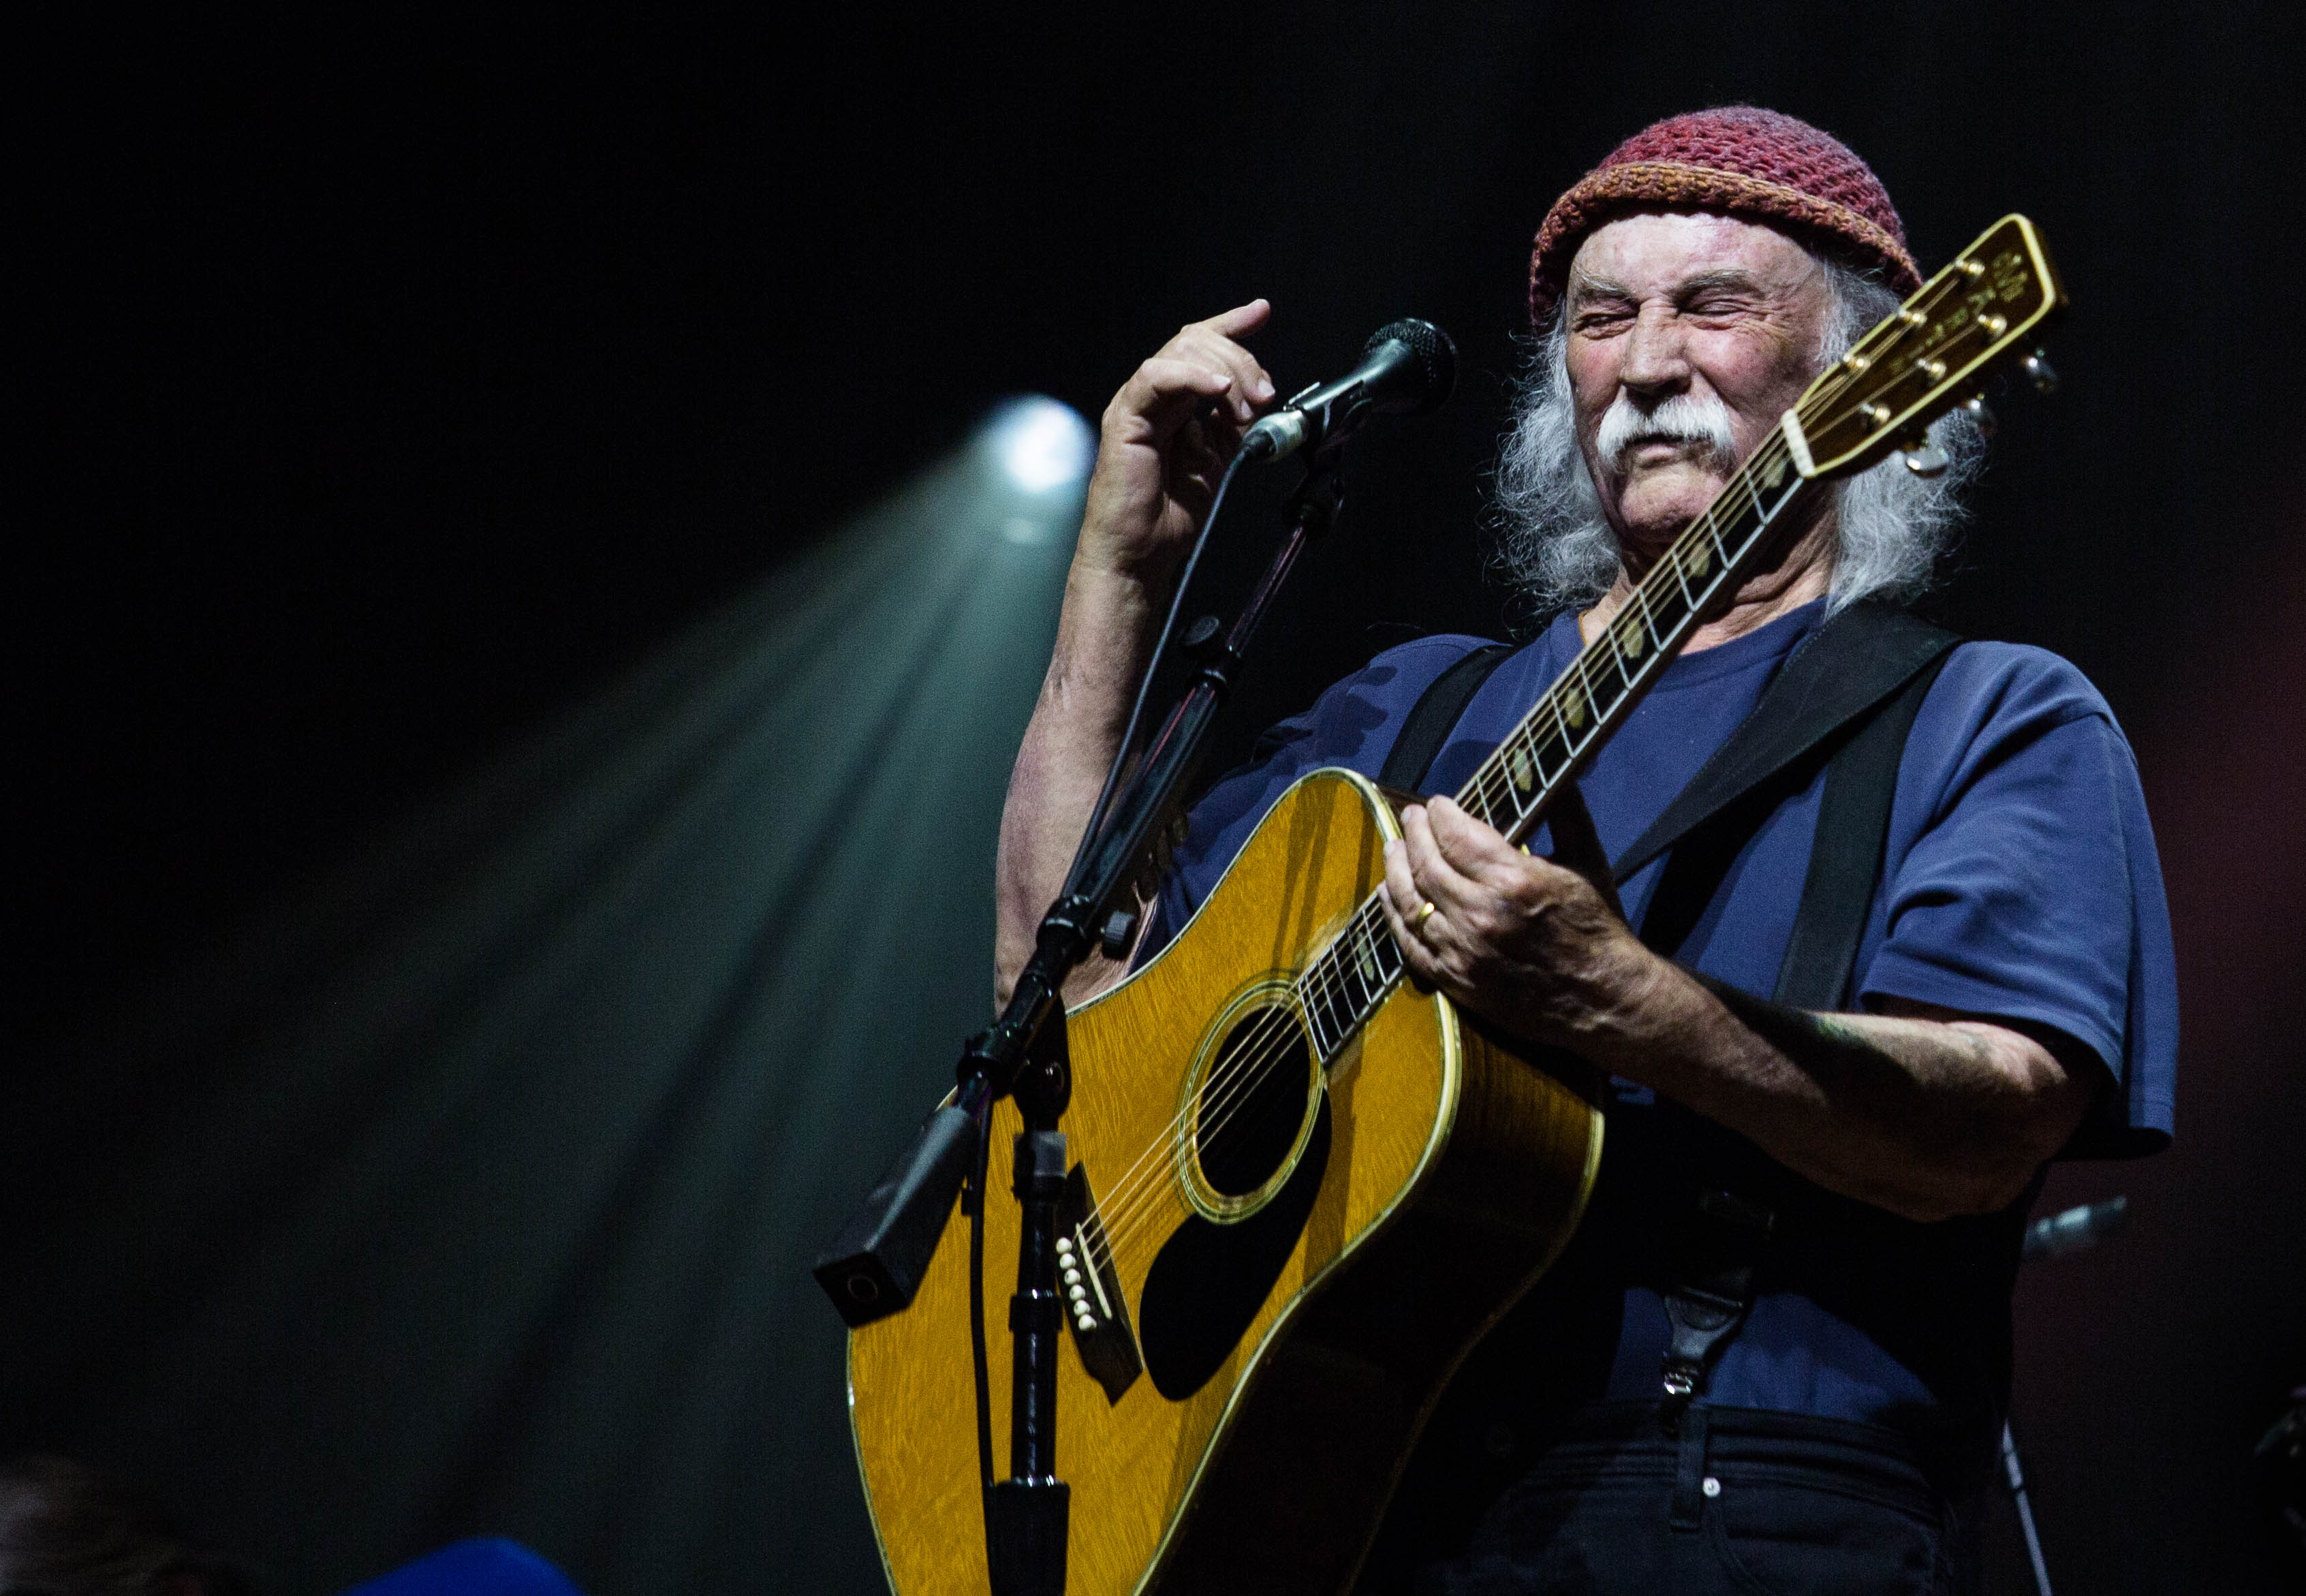 An Evening with David Crosby & Friends